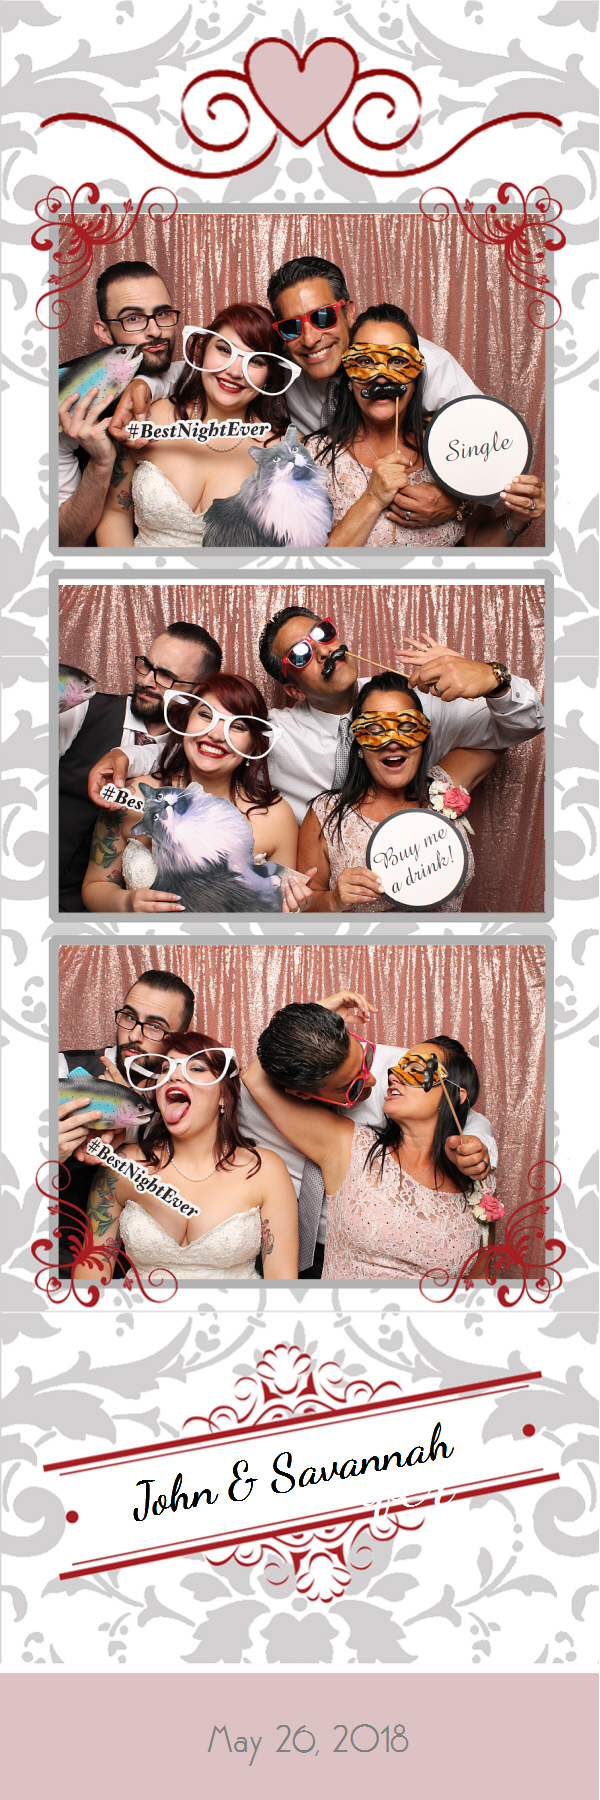 2x6 photo strip of group posing with props sunglasses and shiny backdrop